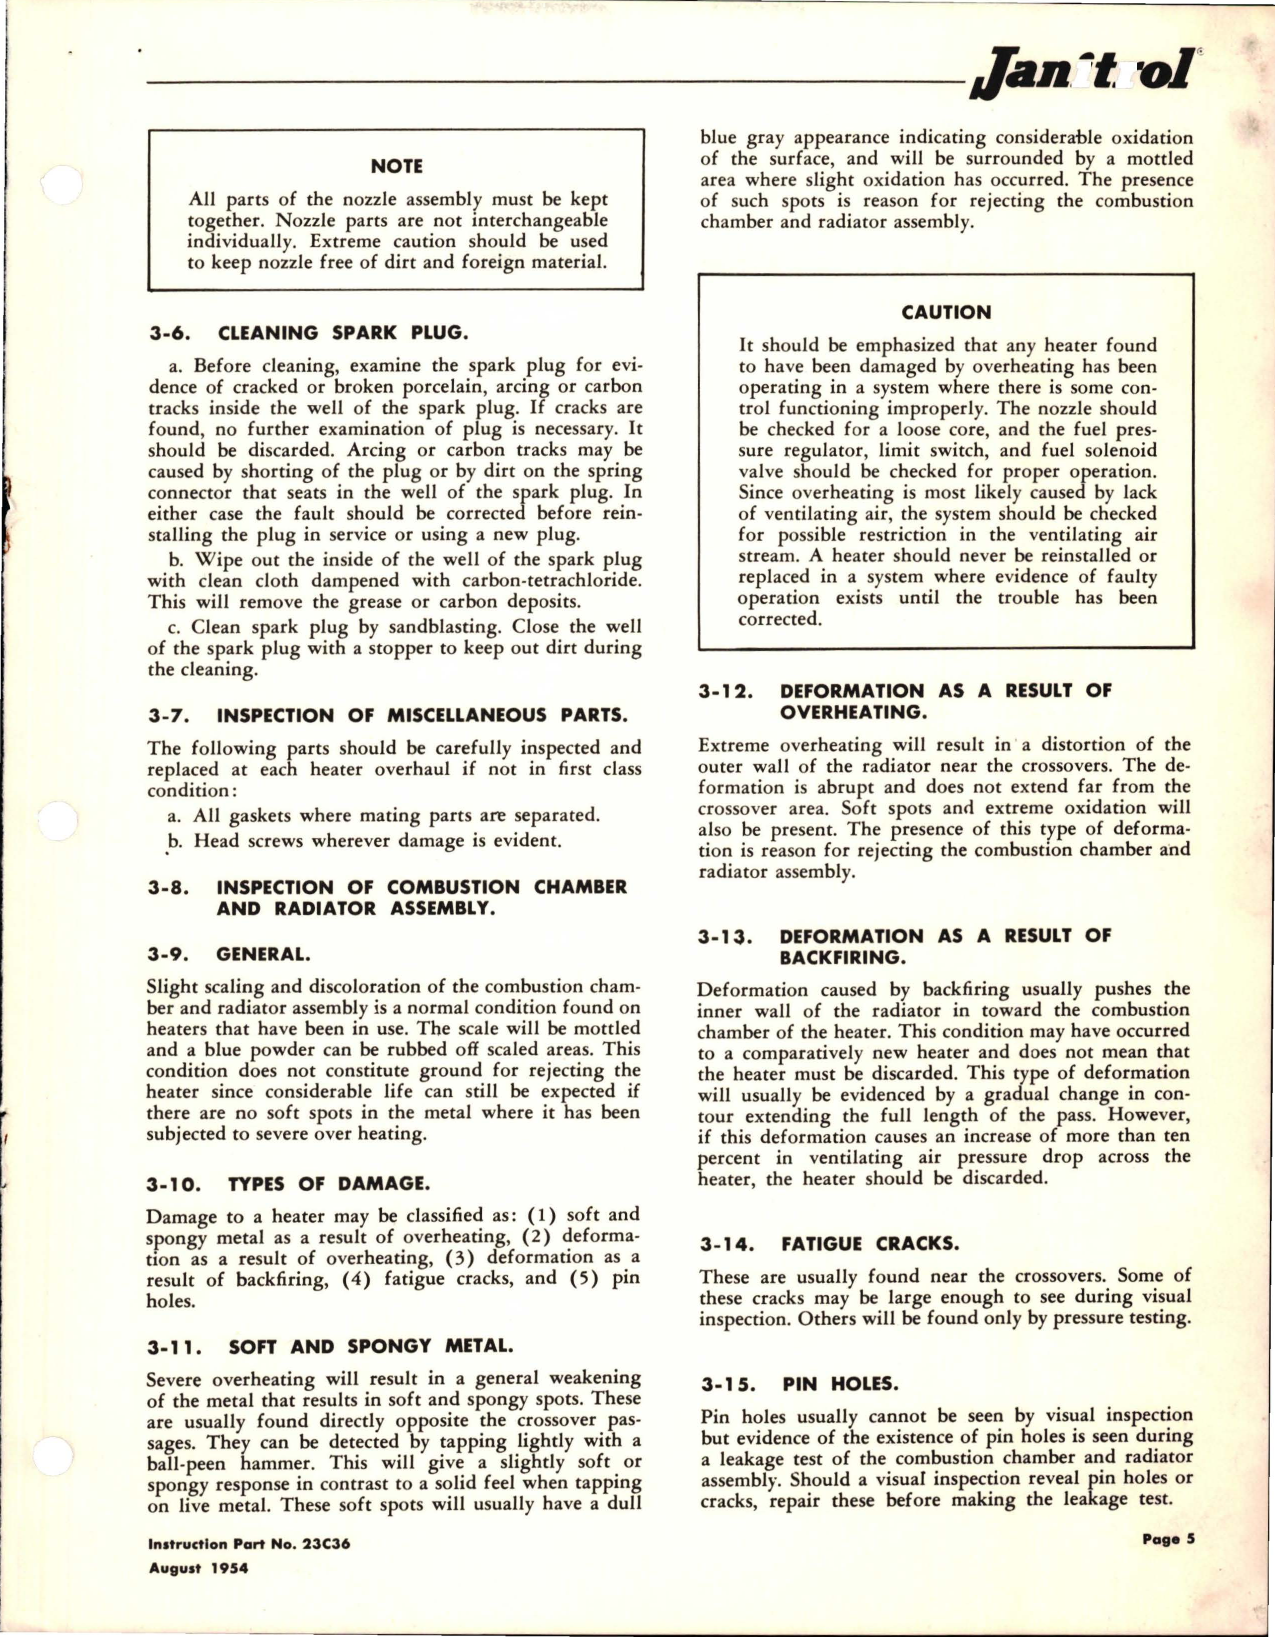 Sample page 5 from AirCorps Library document: Maintenance Instructions for Aircraft Heaters - 20C61, 20C63, S-50, and S-100 Series